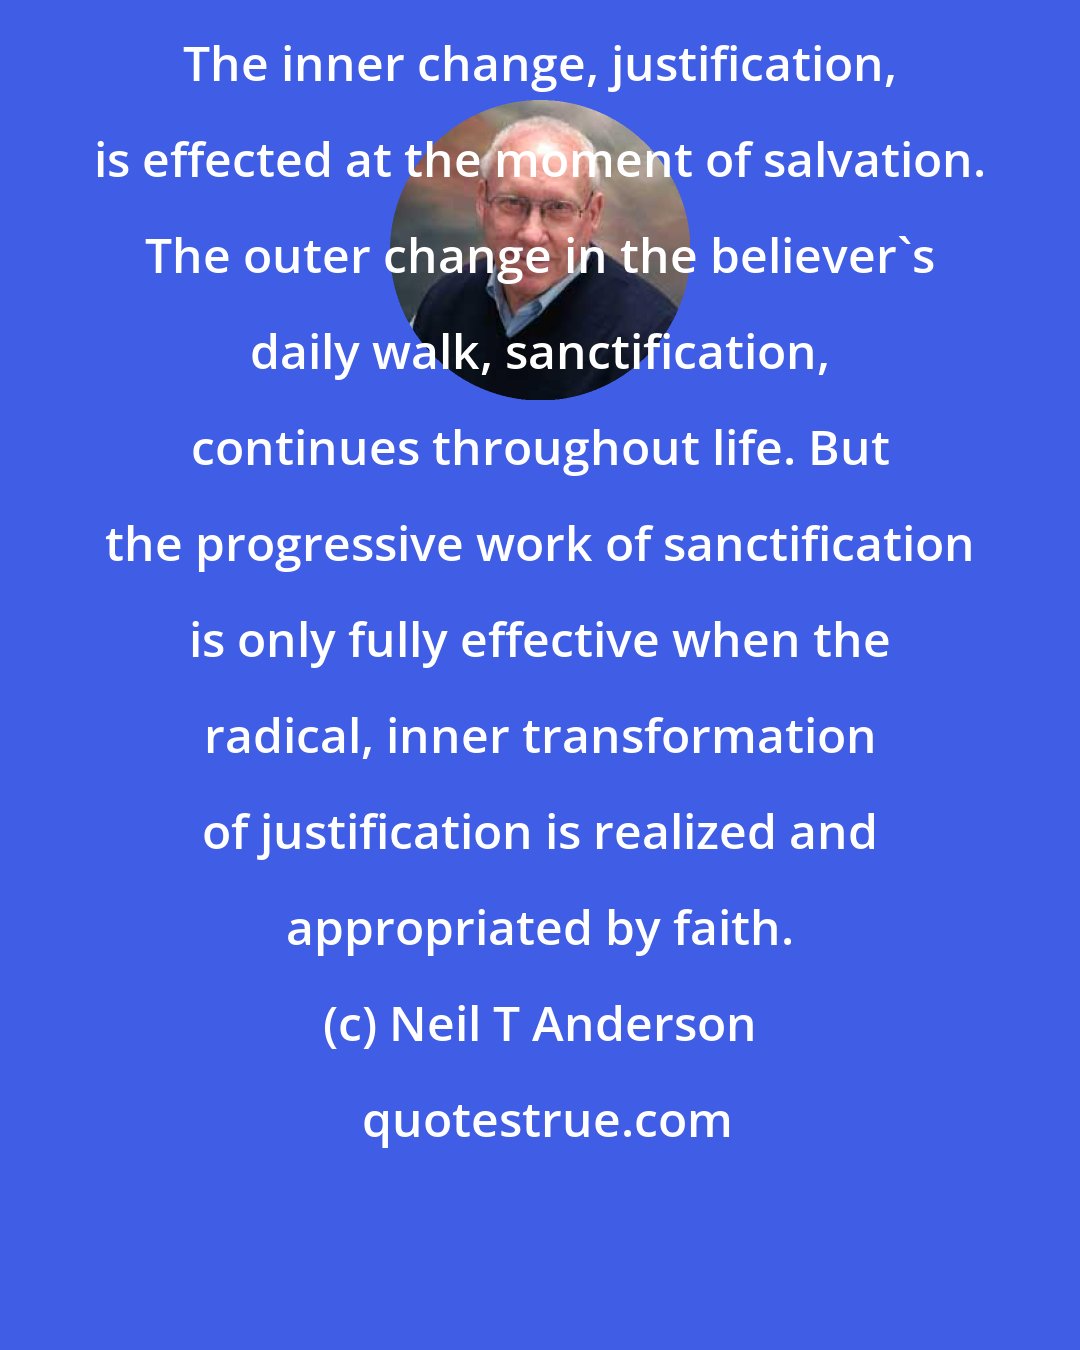 Neil T Anderson: The inner change, justification, is effected at the moment of salvation. The outer change in the believer's daily walk, sanctification, continues throughout life. But the progressive work of sanctification is only fully effective when the radical, inner transformation of justification is realized and appropriated by faith.